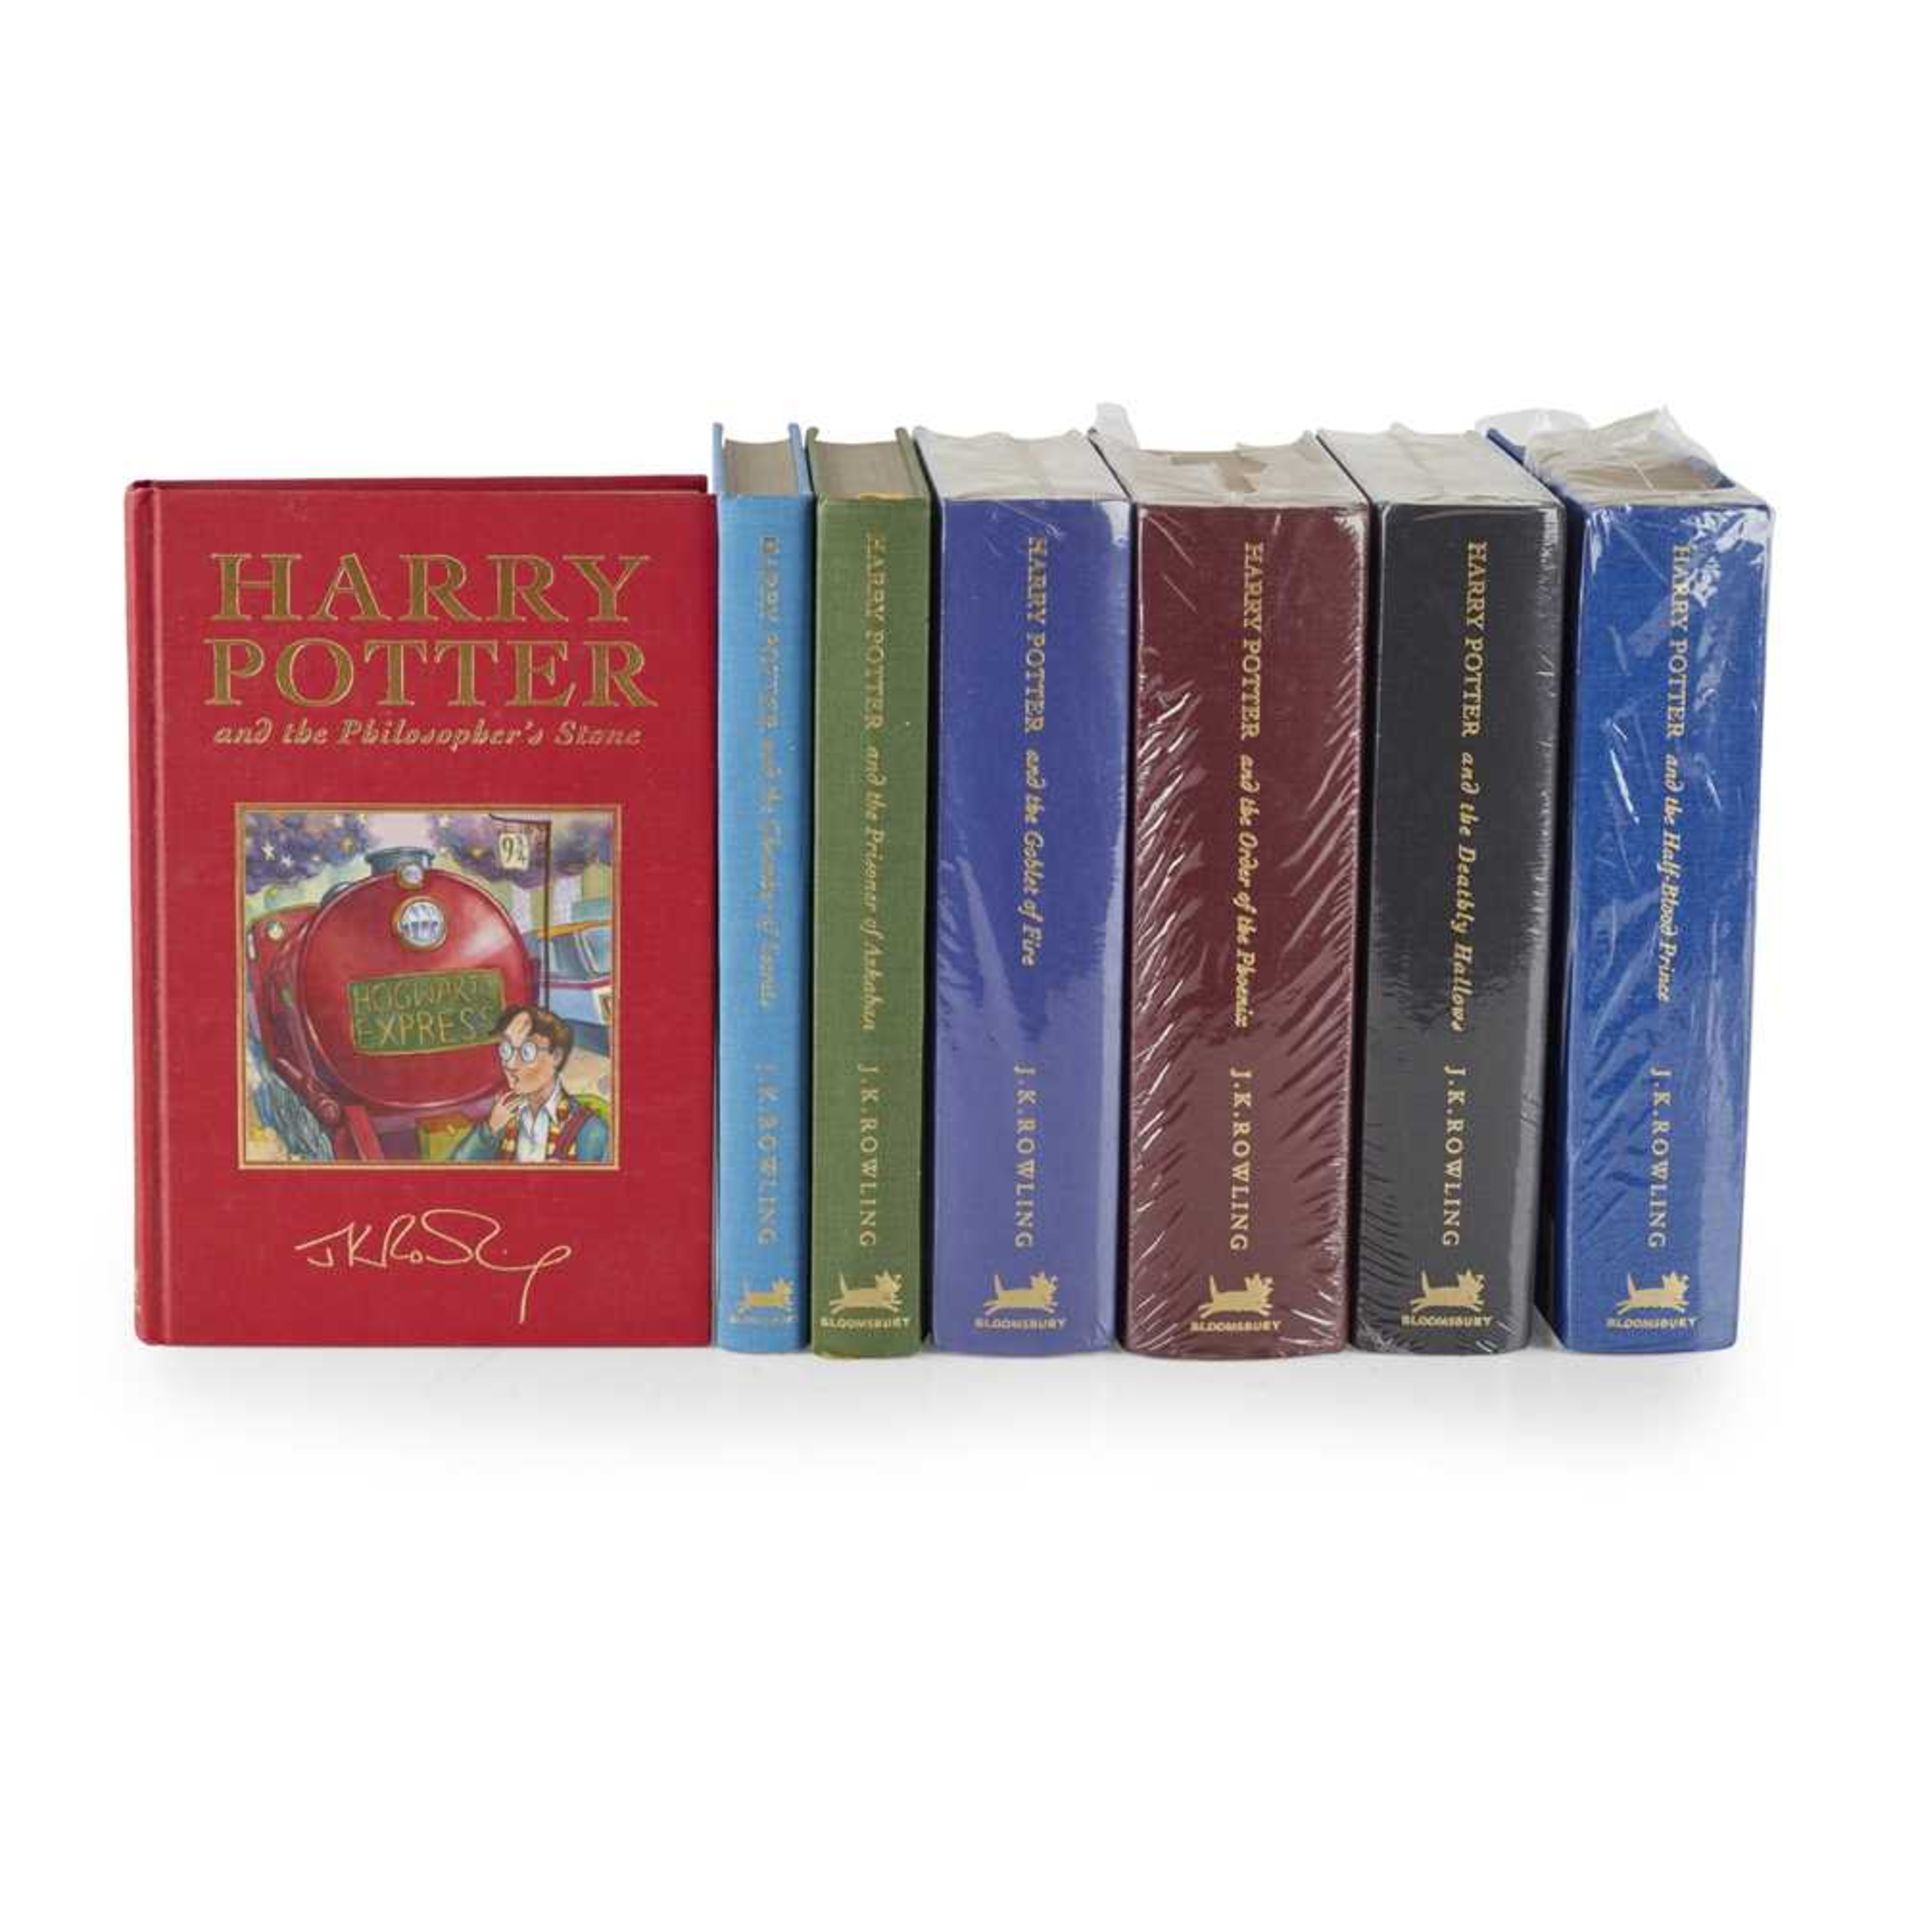 Rowling, J.K. Harry Potter: a set of de-luxe editions Harry Potter and the Philosopher's Stone.